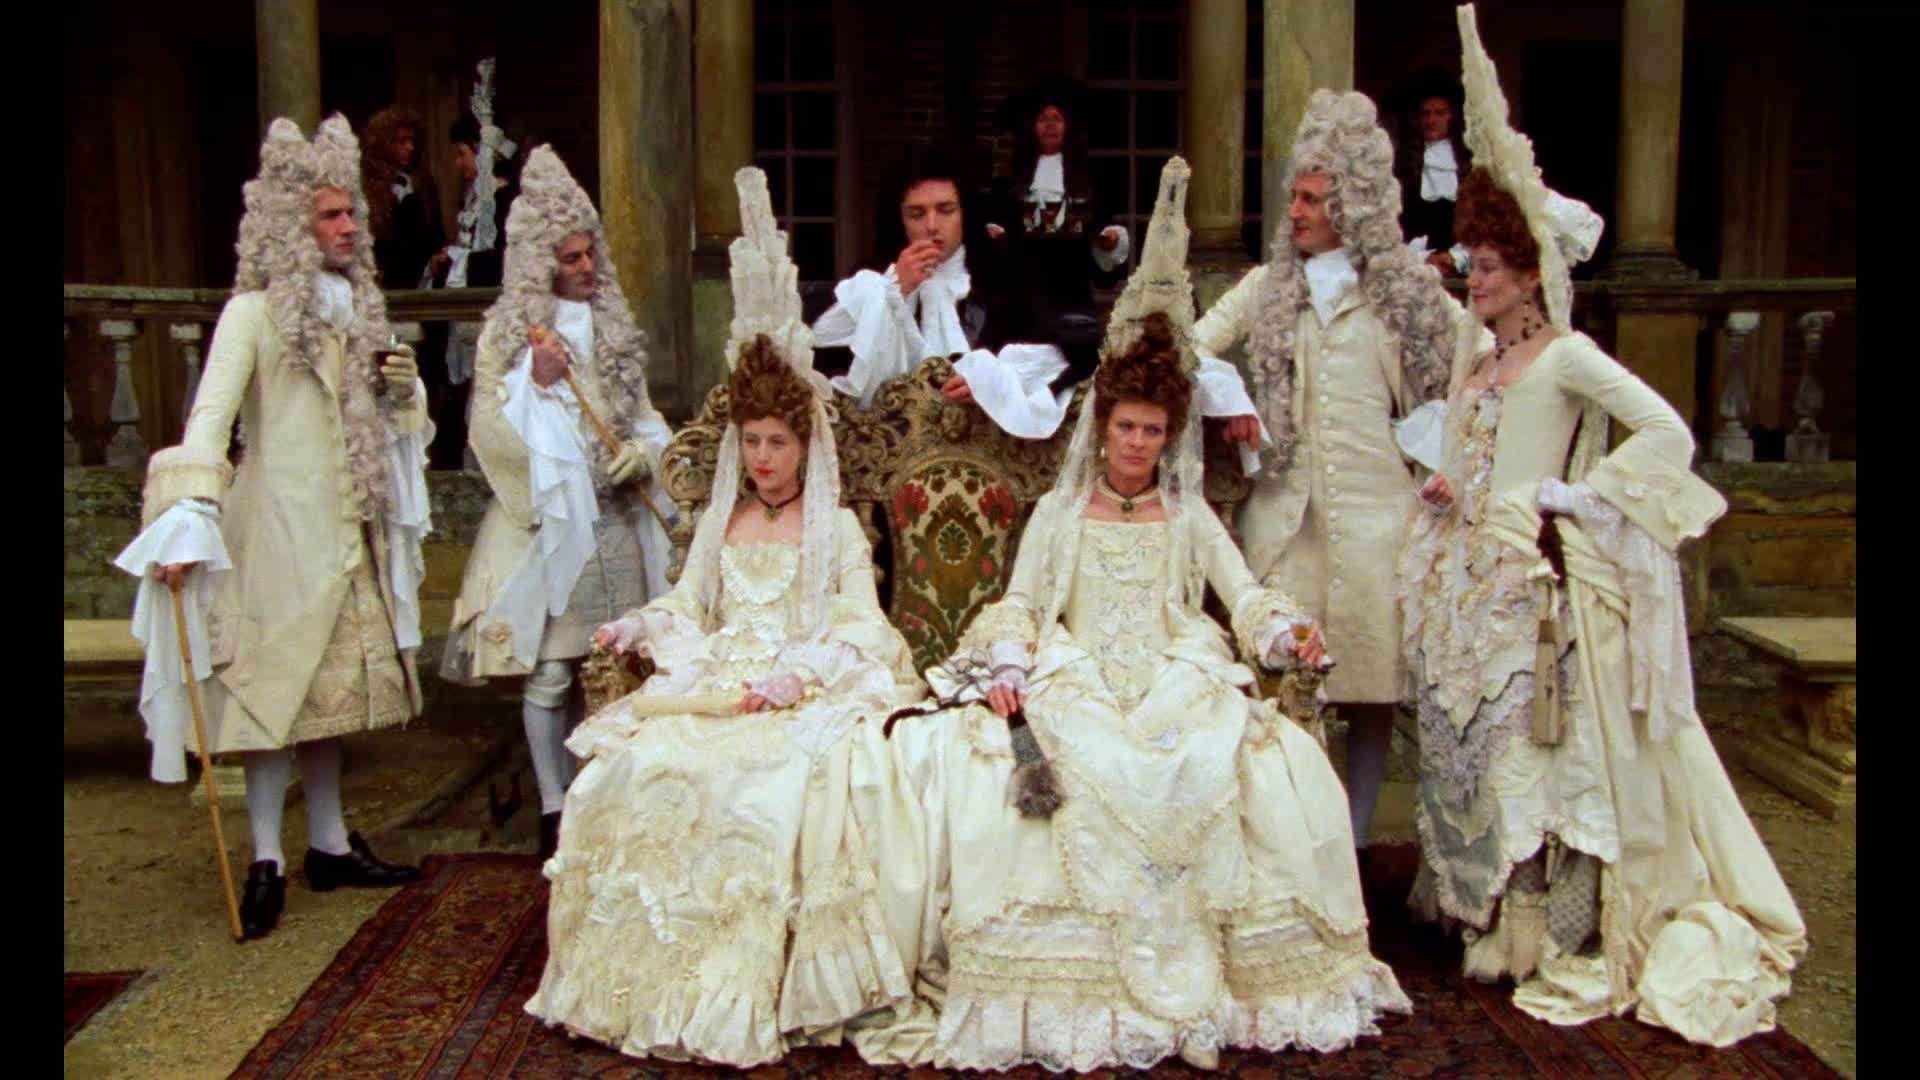 Two royally dressed aristocratic women settled in chairs as they are surrounded by their confidants